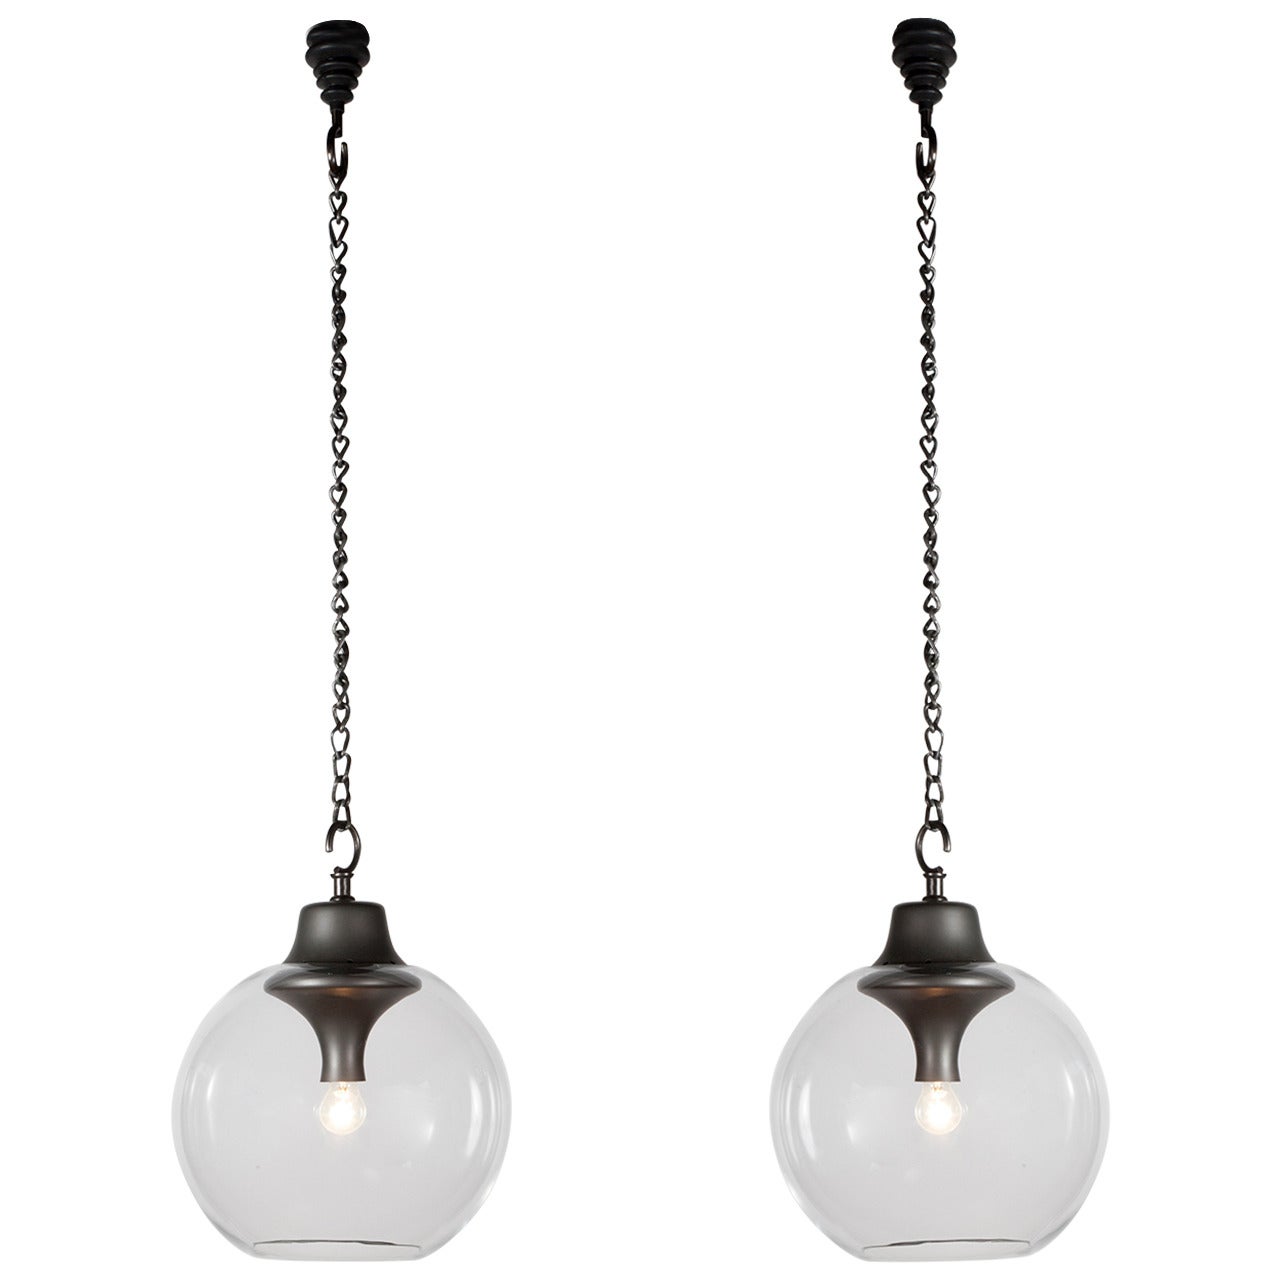 Pair of Hanging Lamps by Luigi Caccia Dominioni For Sale